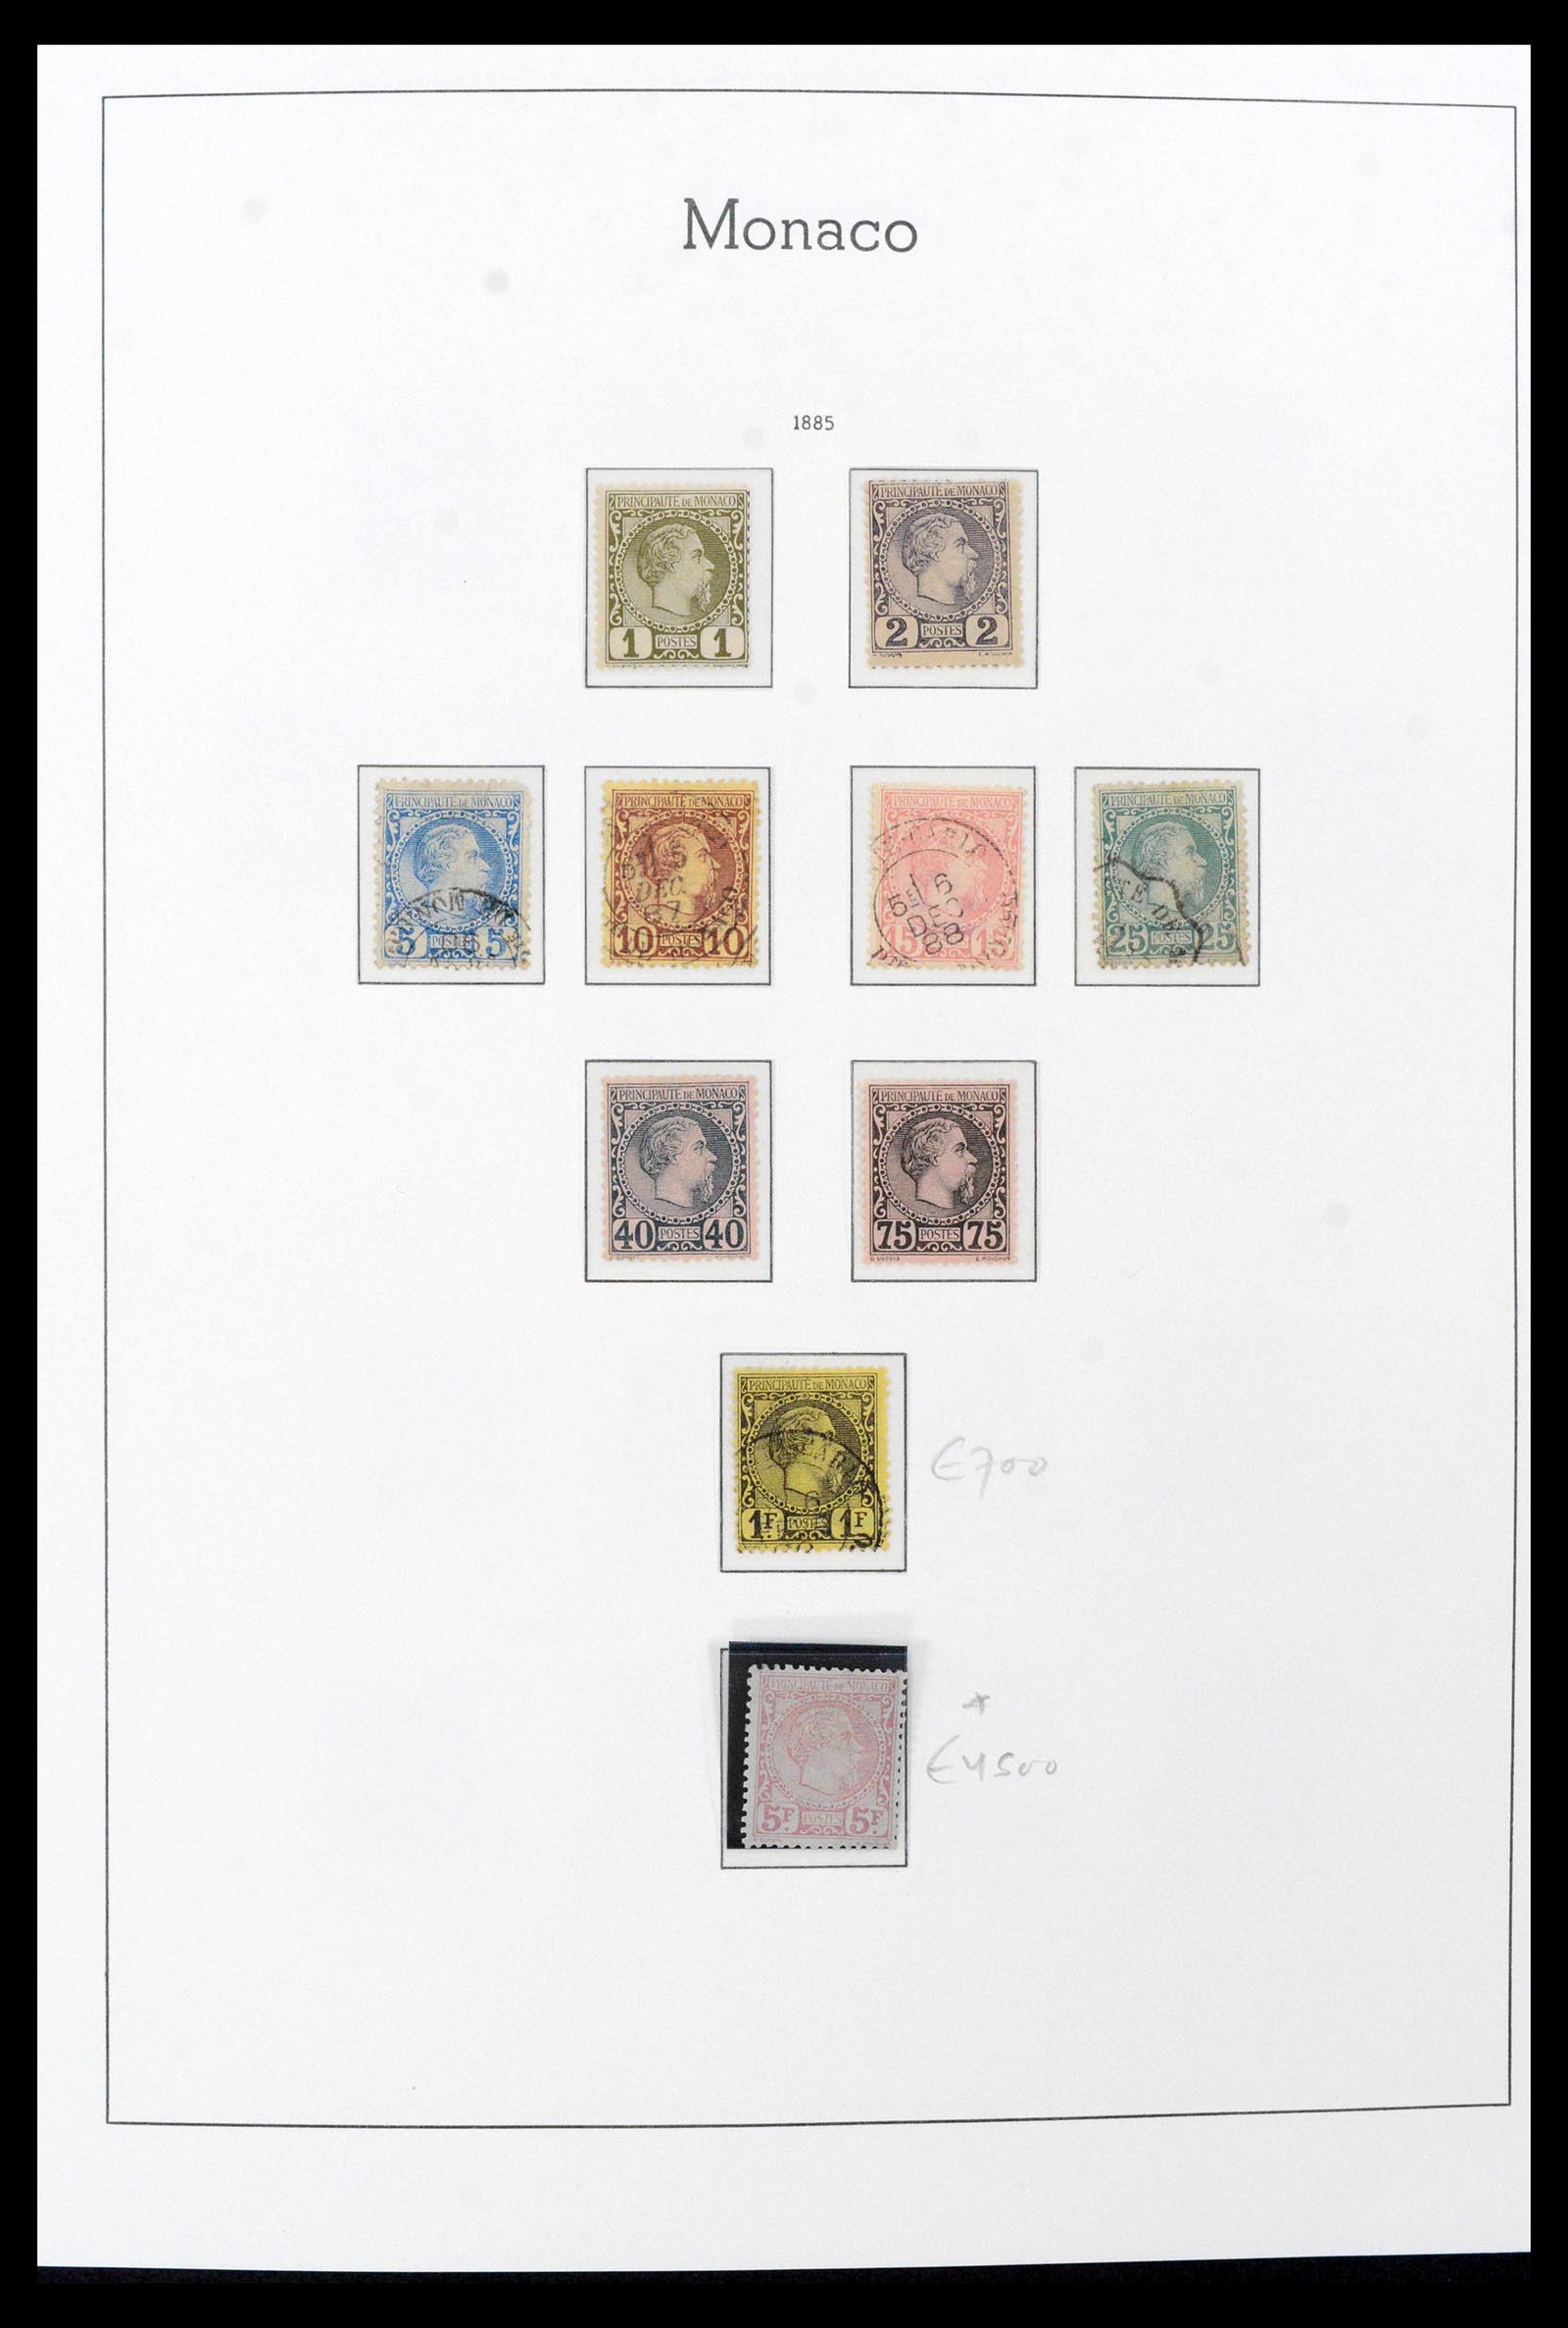 39390 0001 - Stamp collection 39390 Monaco complete 1885-1990.